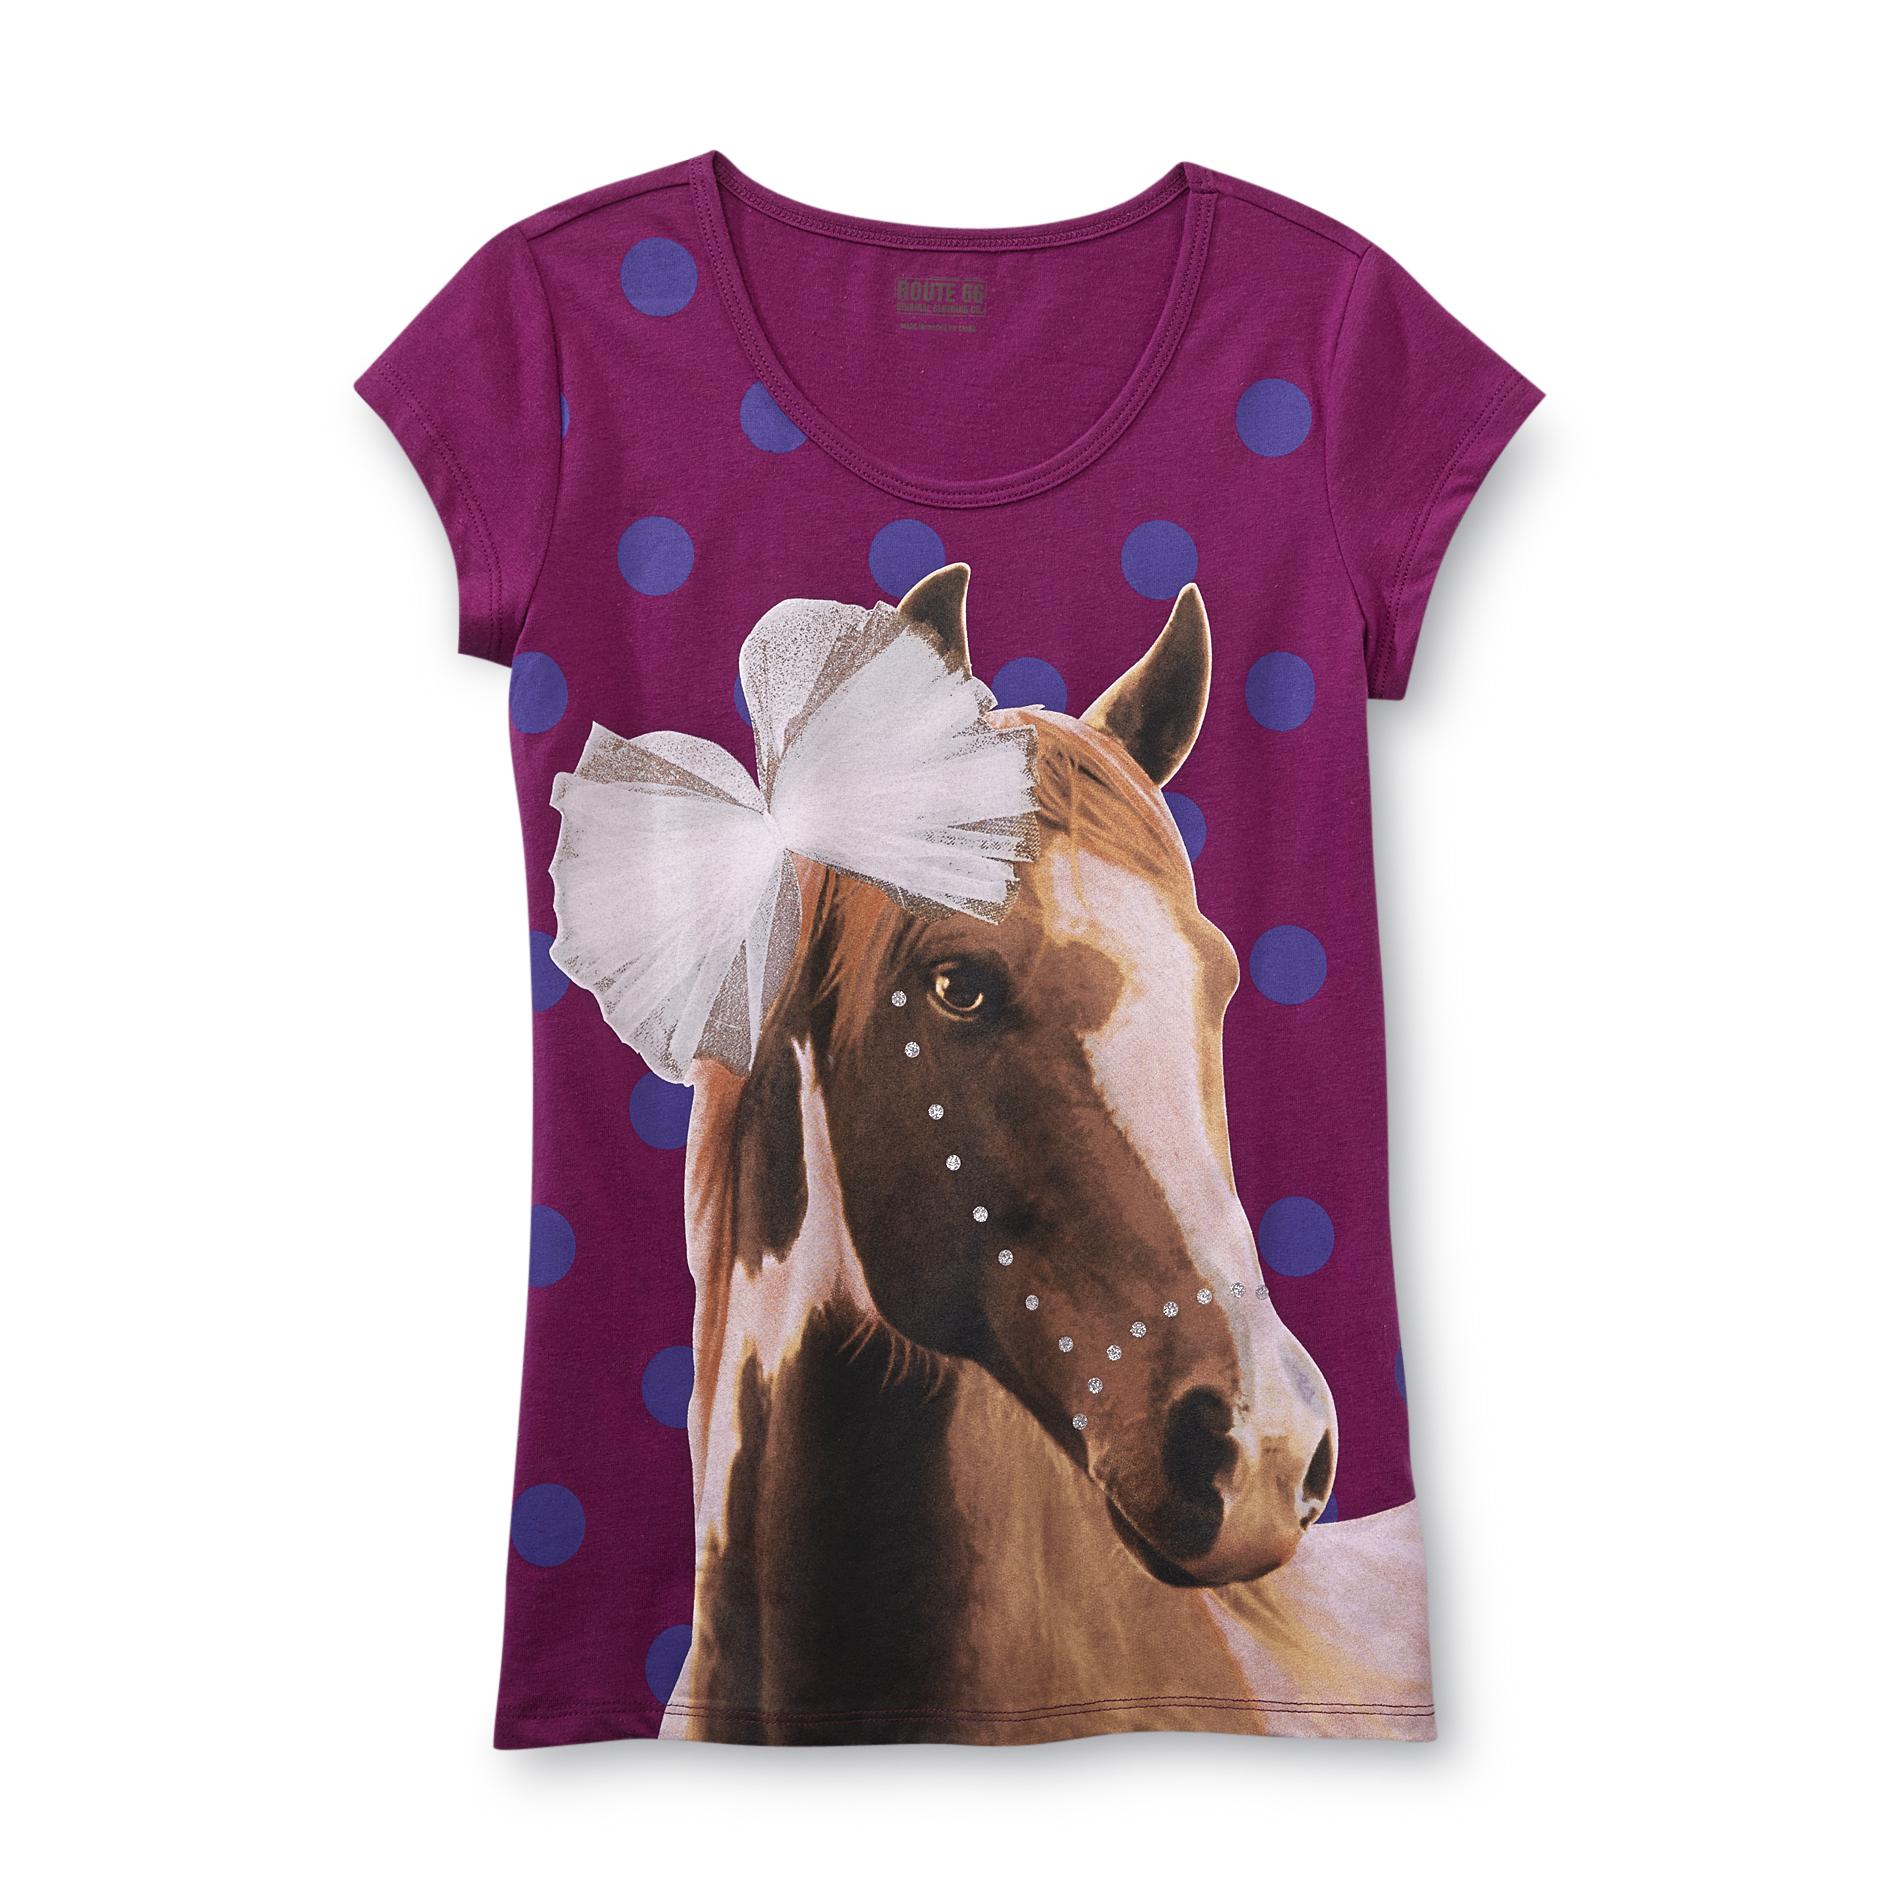 Route 66 Girl's Graphic T-Shirt - Horse